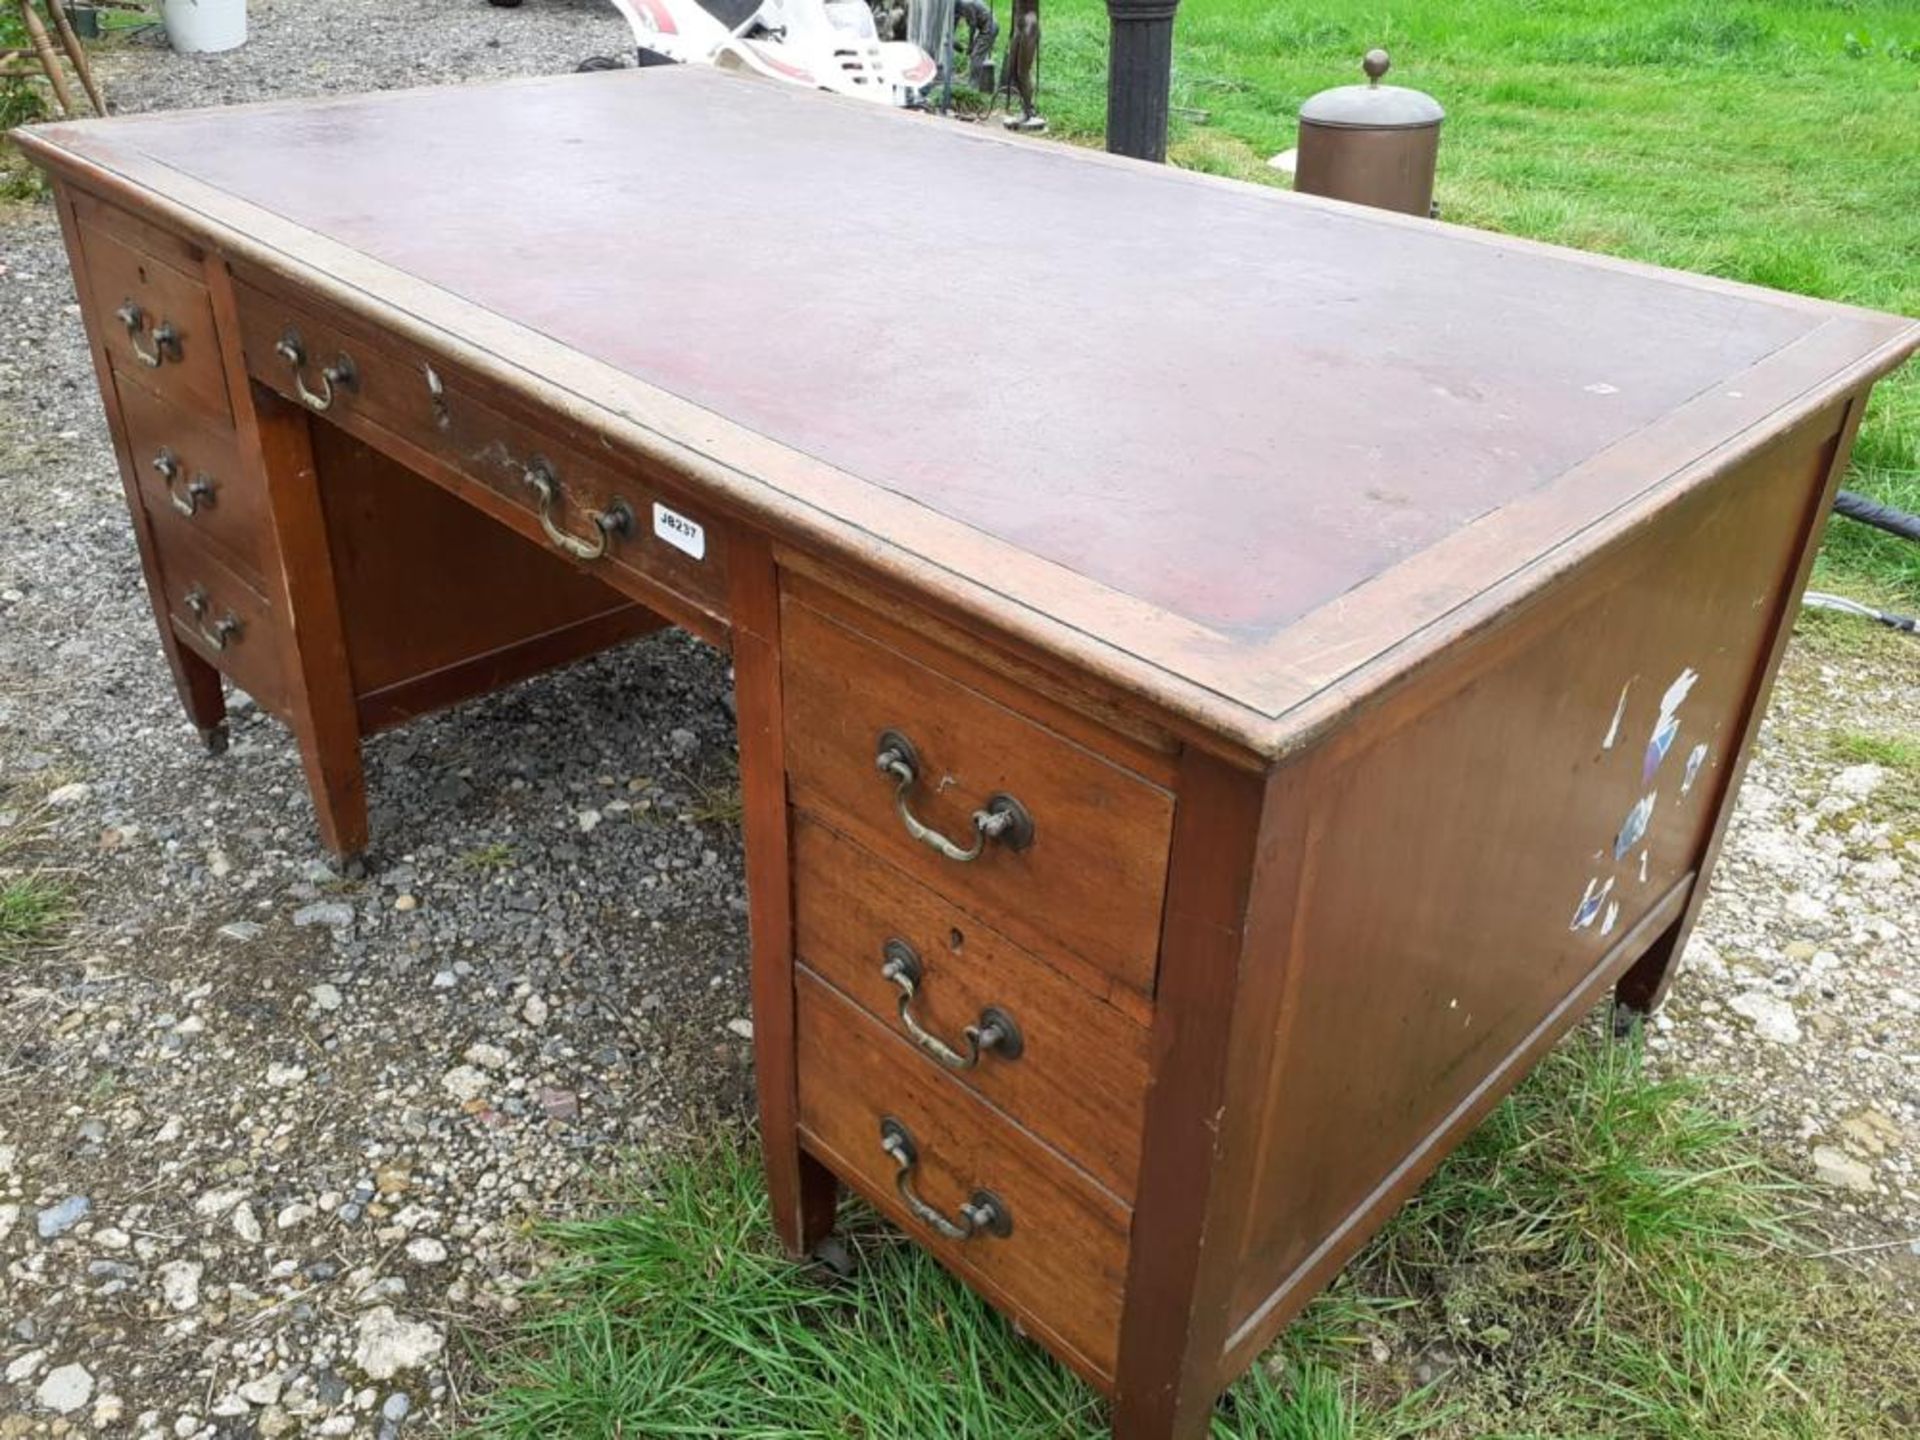 1 x Large Original Writing Desk With Leather Top Pad And Deep Drawers With Original Castors Under - Image 2 of 13